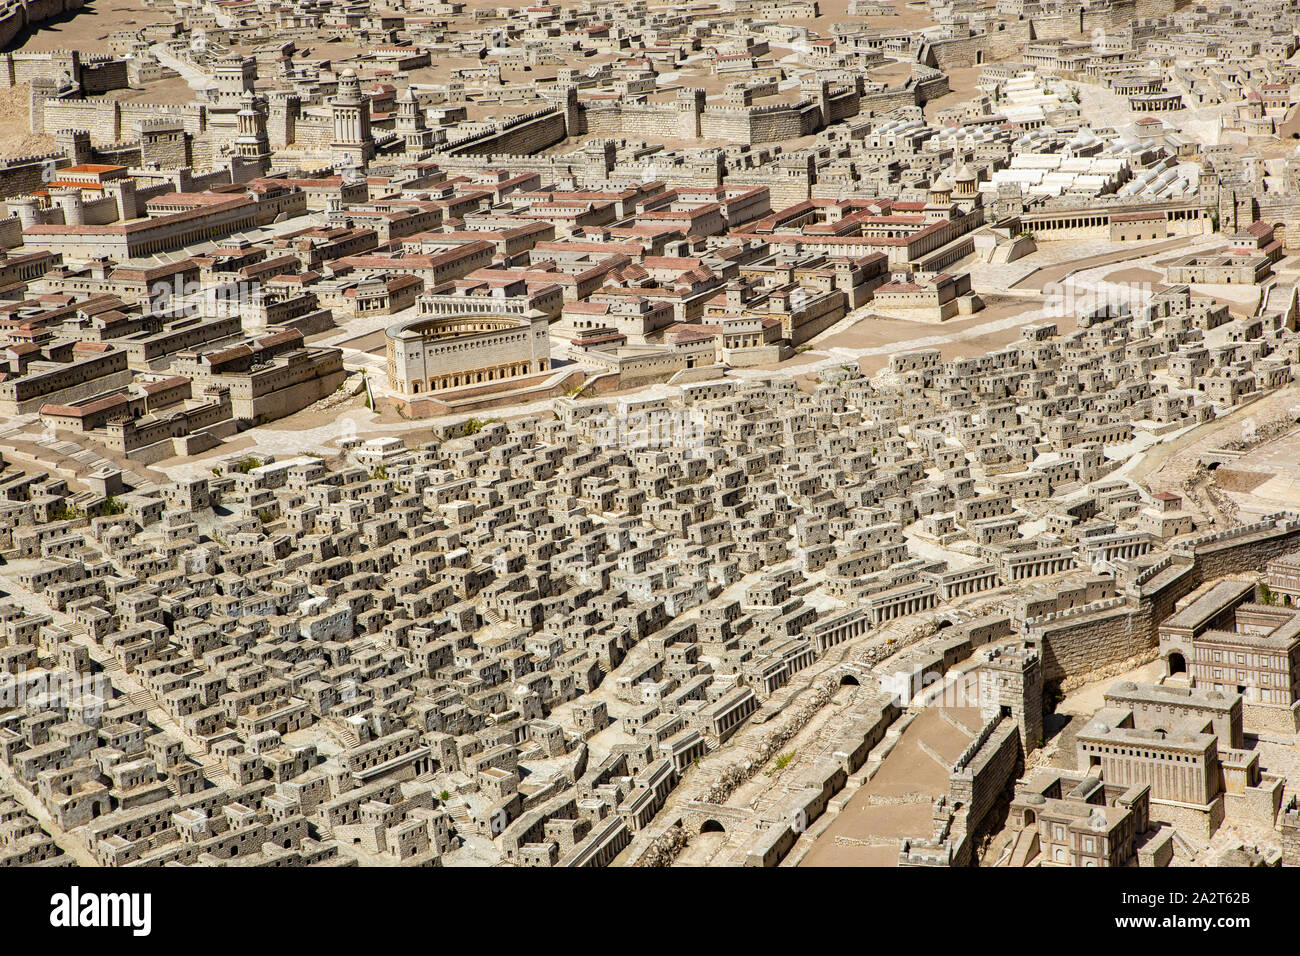 Holyland Model of Jerusalem scale model of the city of Jerusalem in the late Second Temple period. Stock Photo